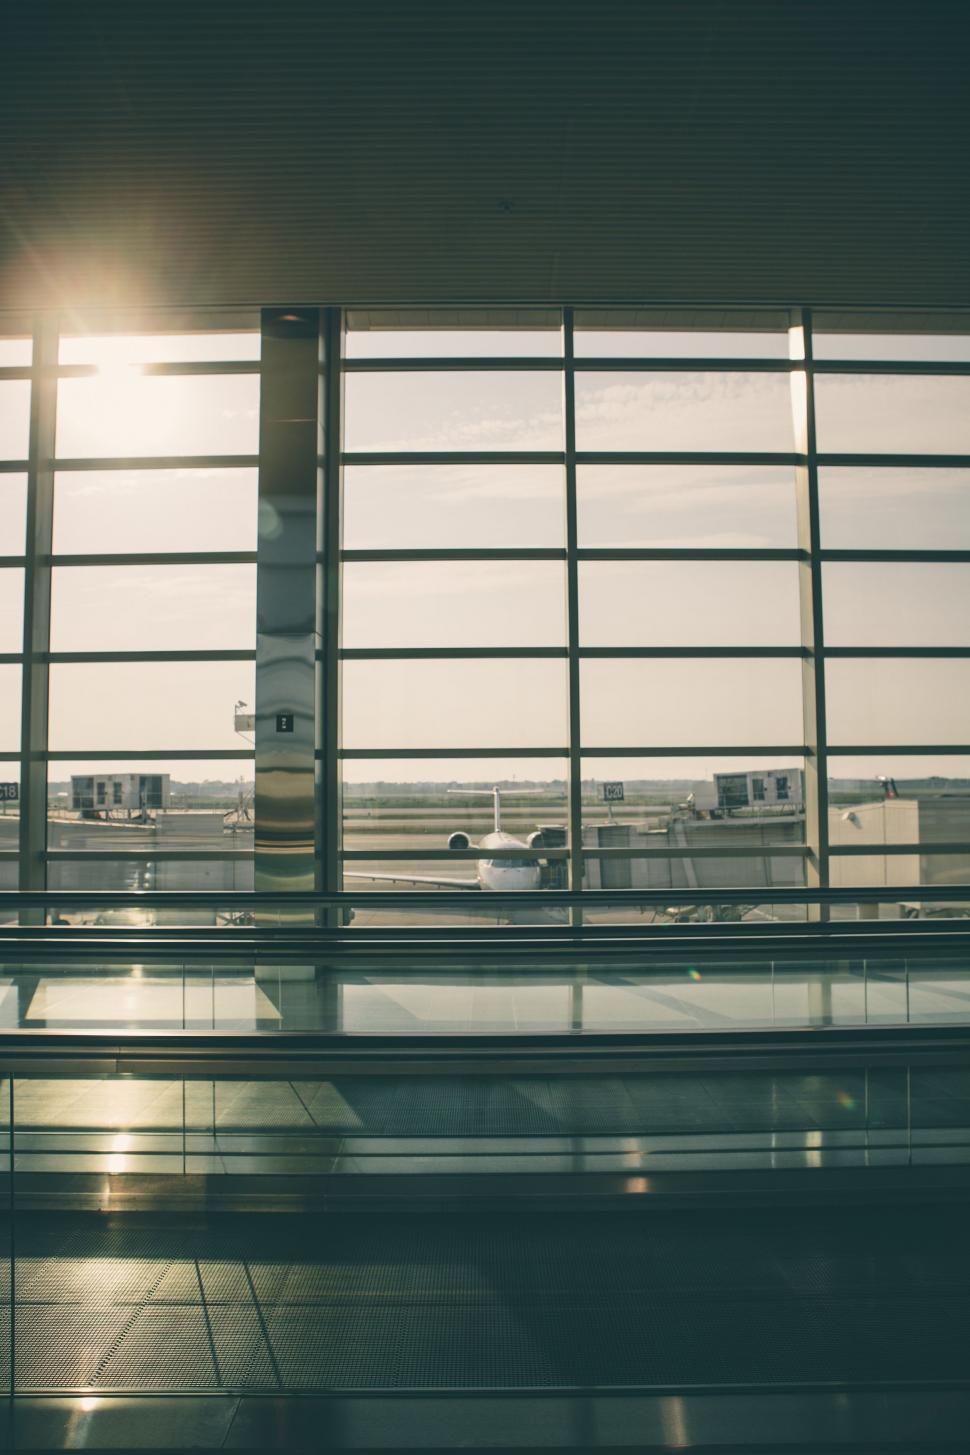 Free Image of Viewing an Airport Through a Window 